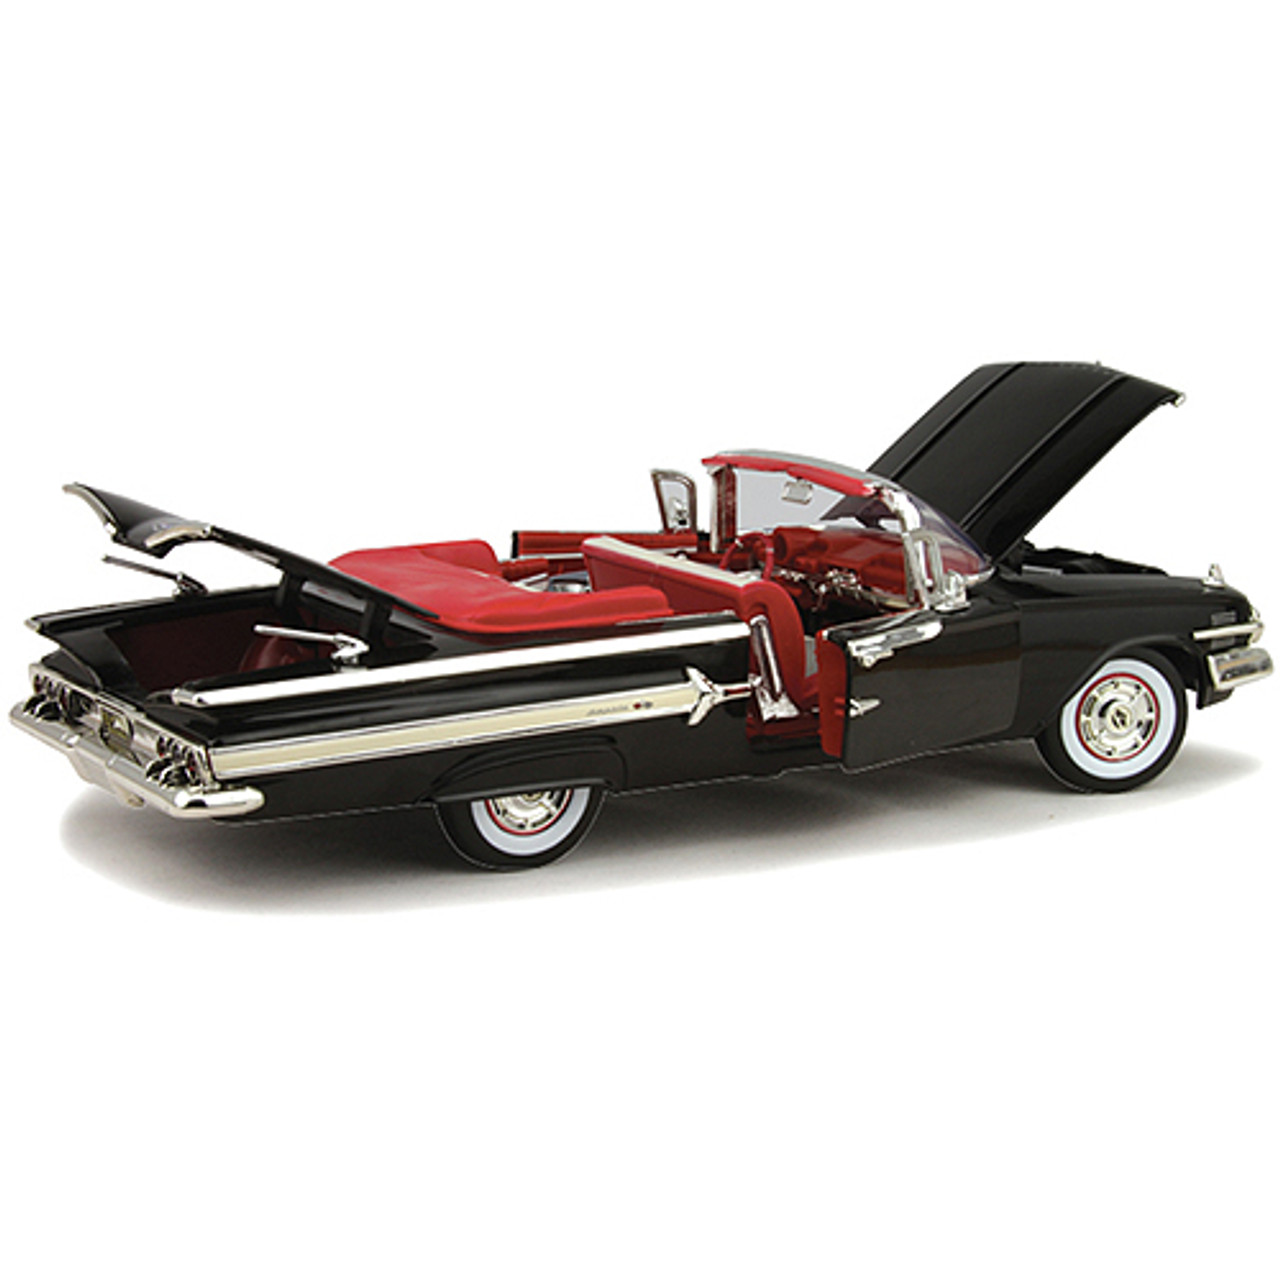 1960 Chevy Impala Convertible - Black 1:18 Scale Diecast Model by Motormax